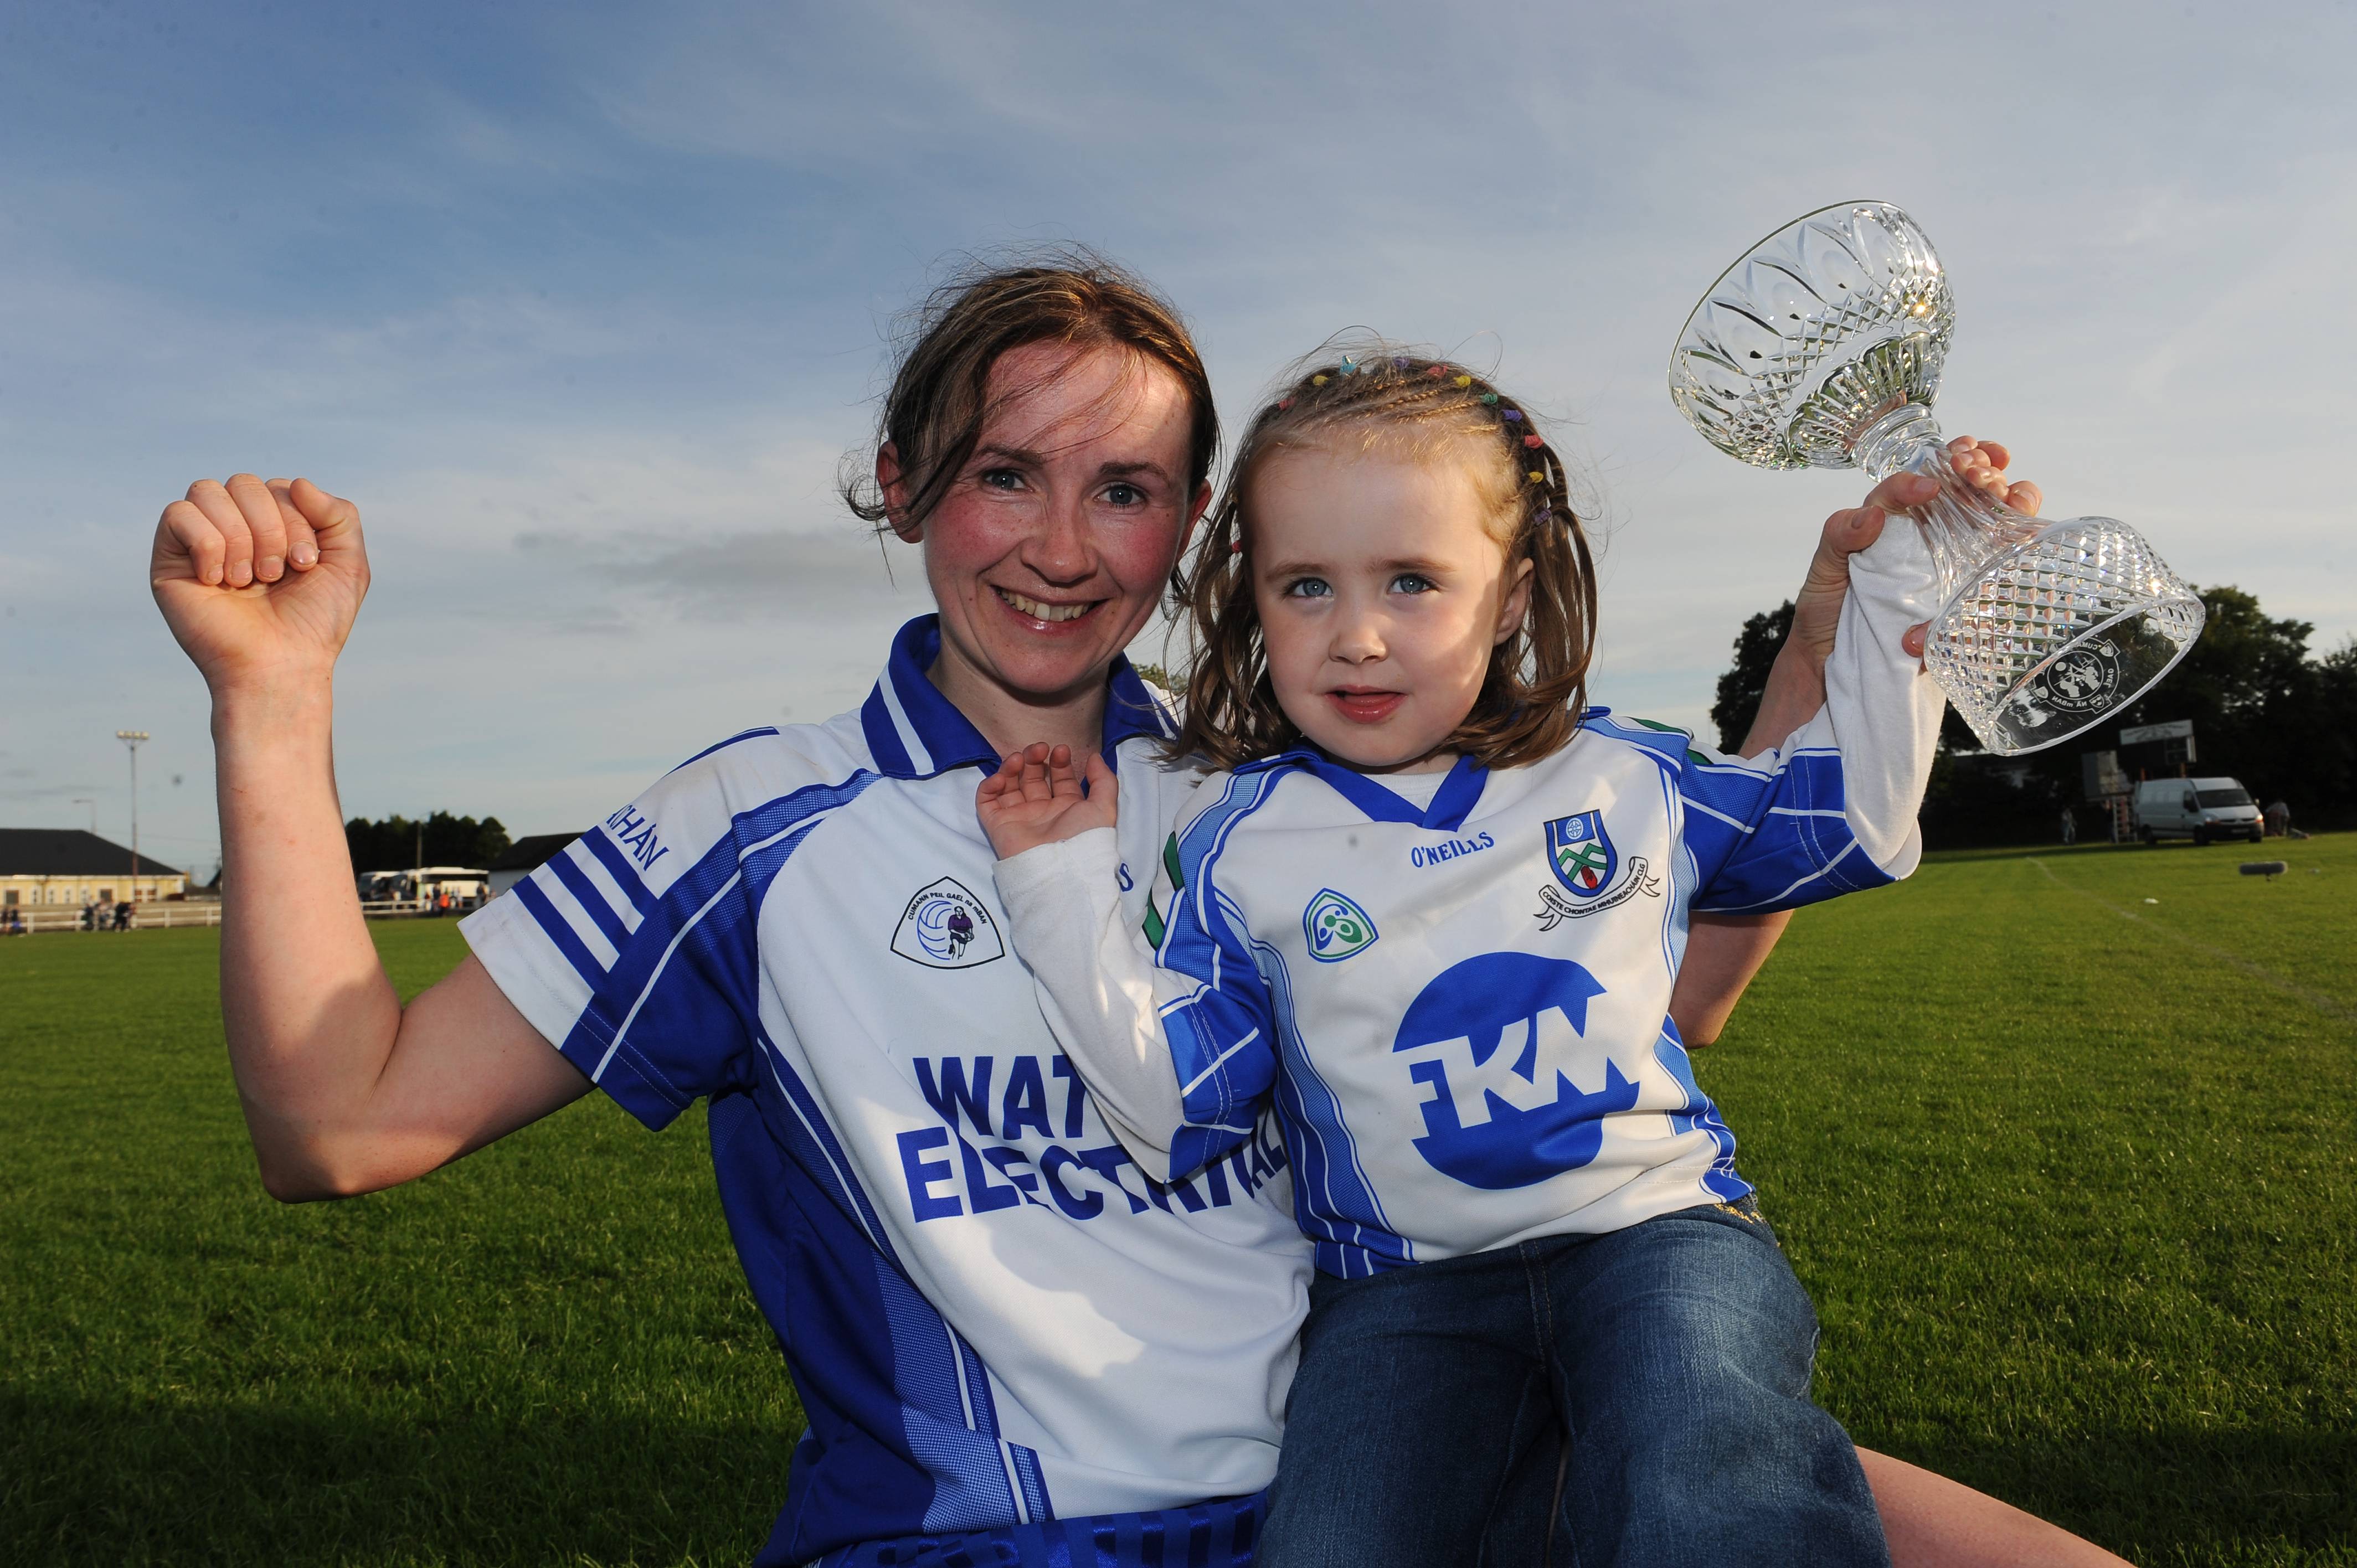 15 August 2009; Player of the match Monaghan's Niamh Kindlon celebrates victory with her 3 year old niece Nicole Kindlon. TG4 All-Ireland Ladies Football Senior Championship Quarter-Final, Monaghan v Galway, Ballymahon GAA Club, Ballymahon, Co. Longford. Picture credit: Paul Mohan / SPORTSFILE *** NO REPRODUCTION FEE ***